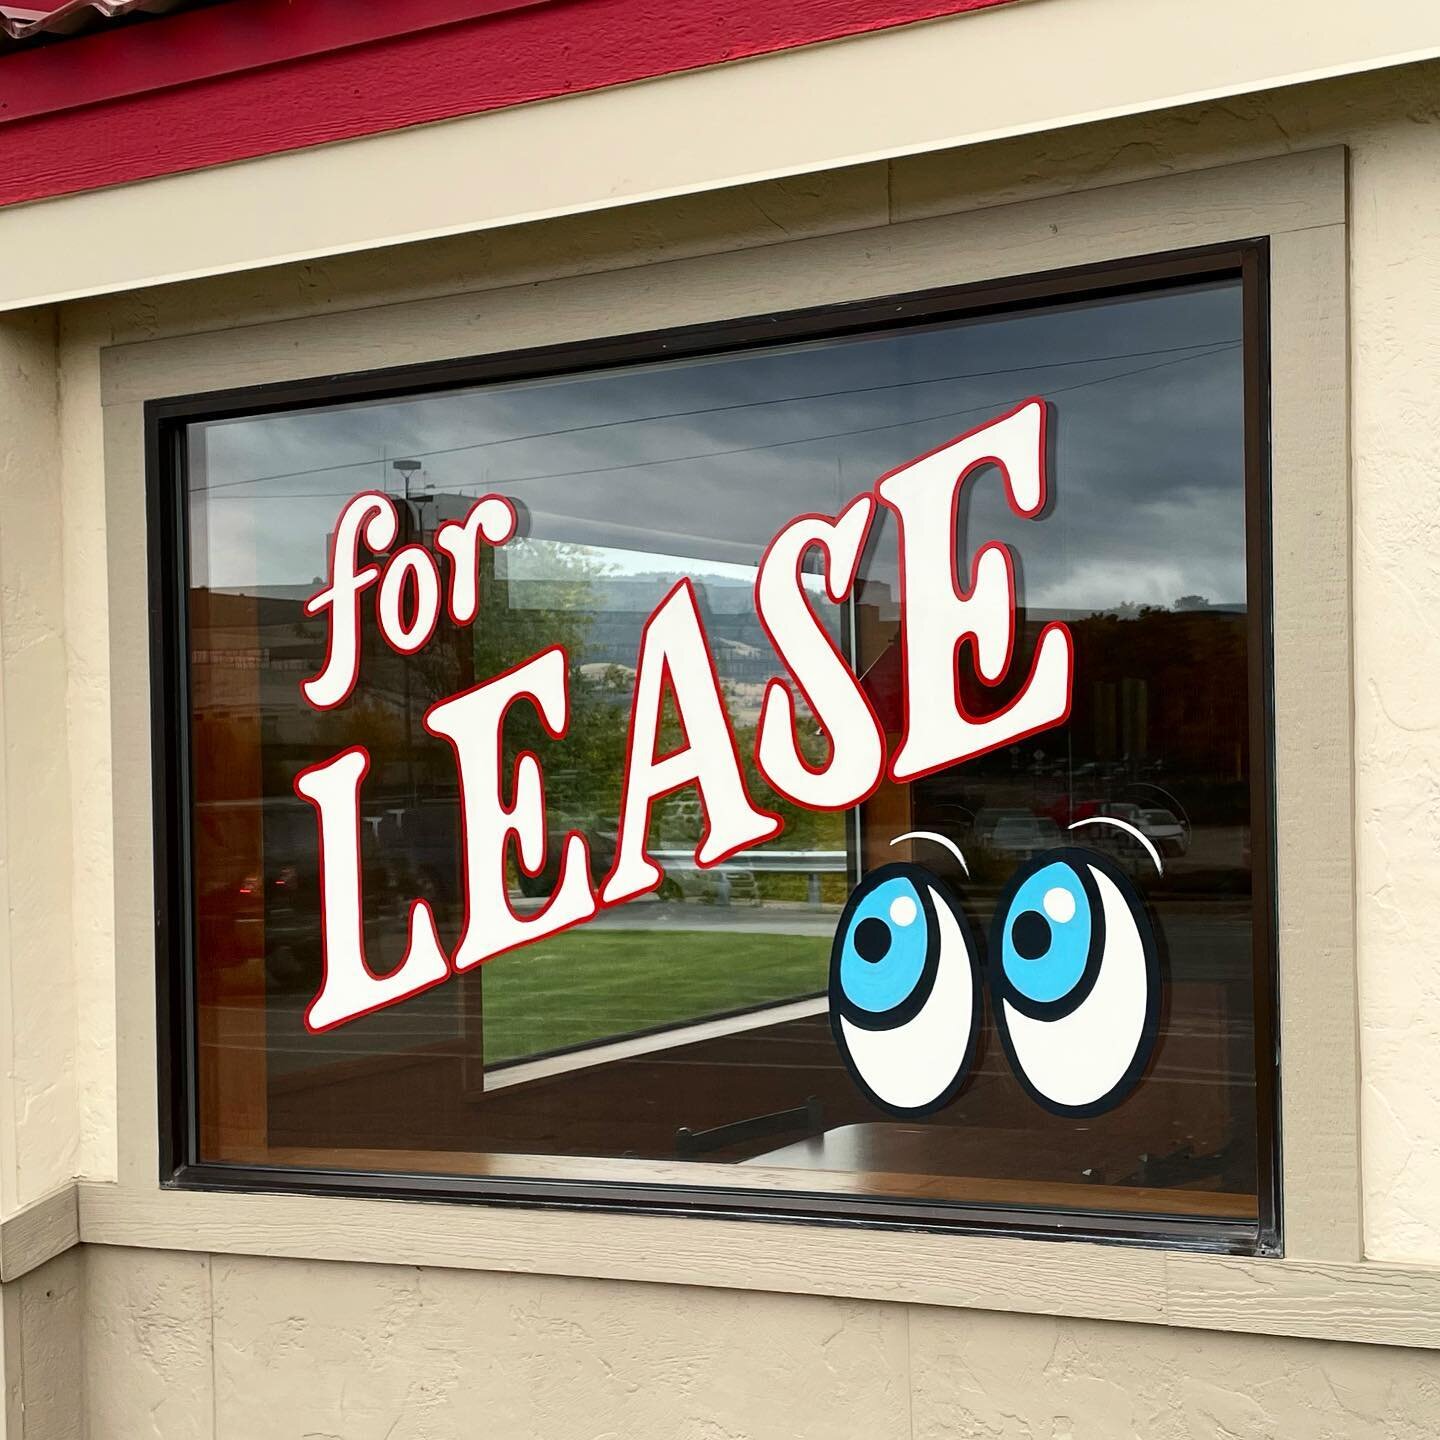 Before I even finished, the client started getting calls about leasing the old Taco John&rsquo;s on Broadway&hellip; guess it&rsquo;s working! 😁 Fun bouncy letters and googly 👀 for the win.
.
.
.
#forleasesign #handpaintedsigns #windowsplashes #win